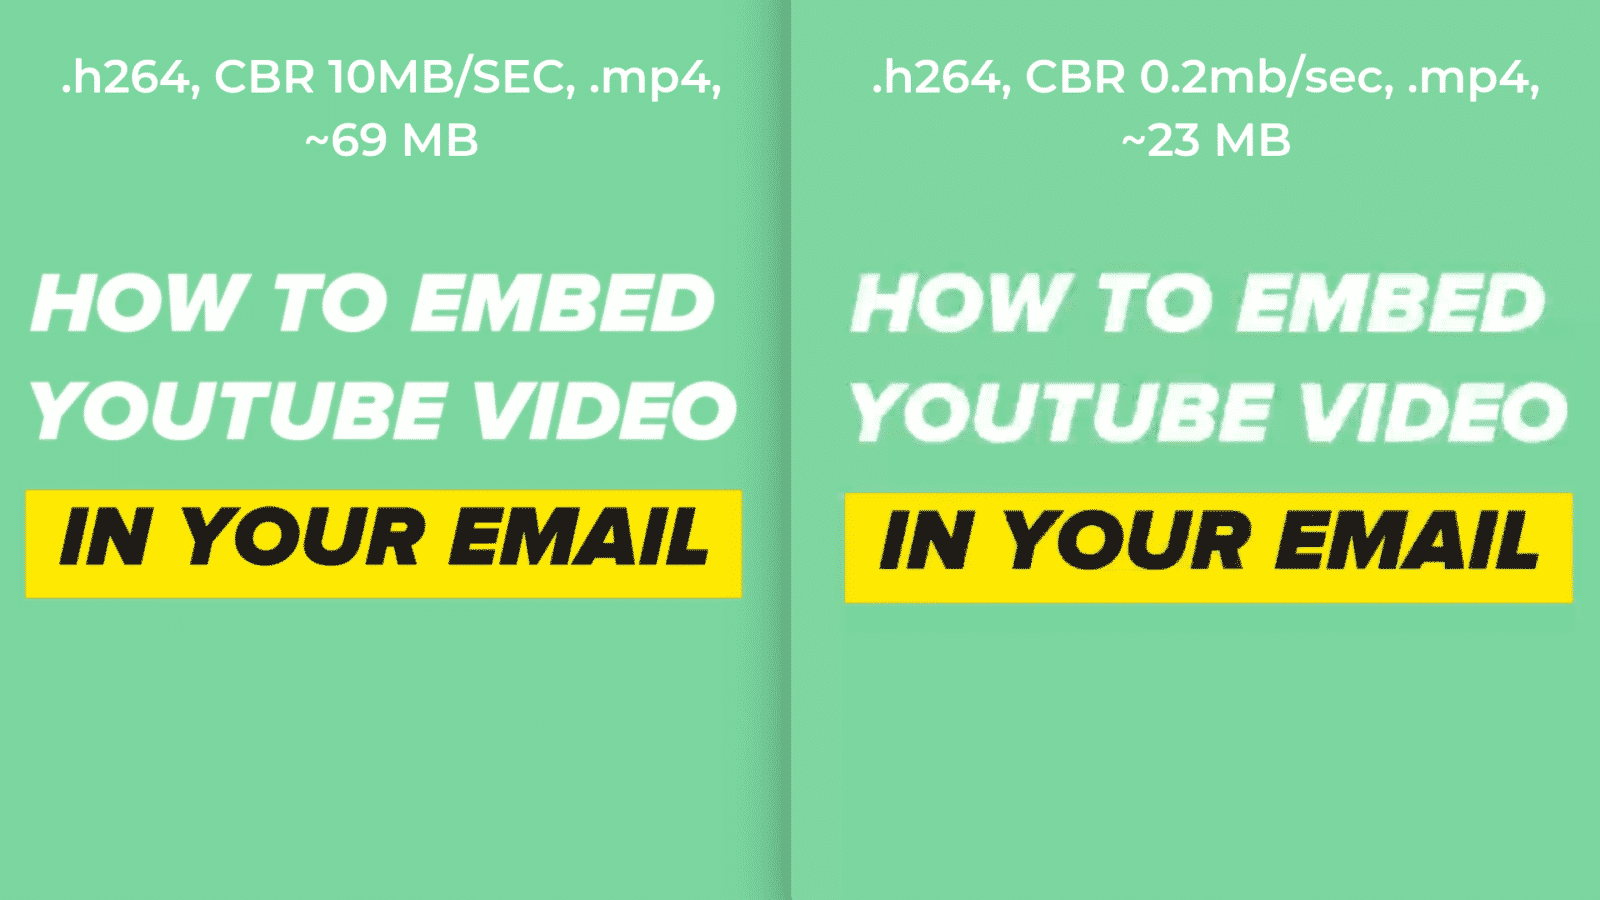 How to compress a video